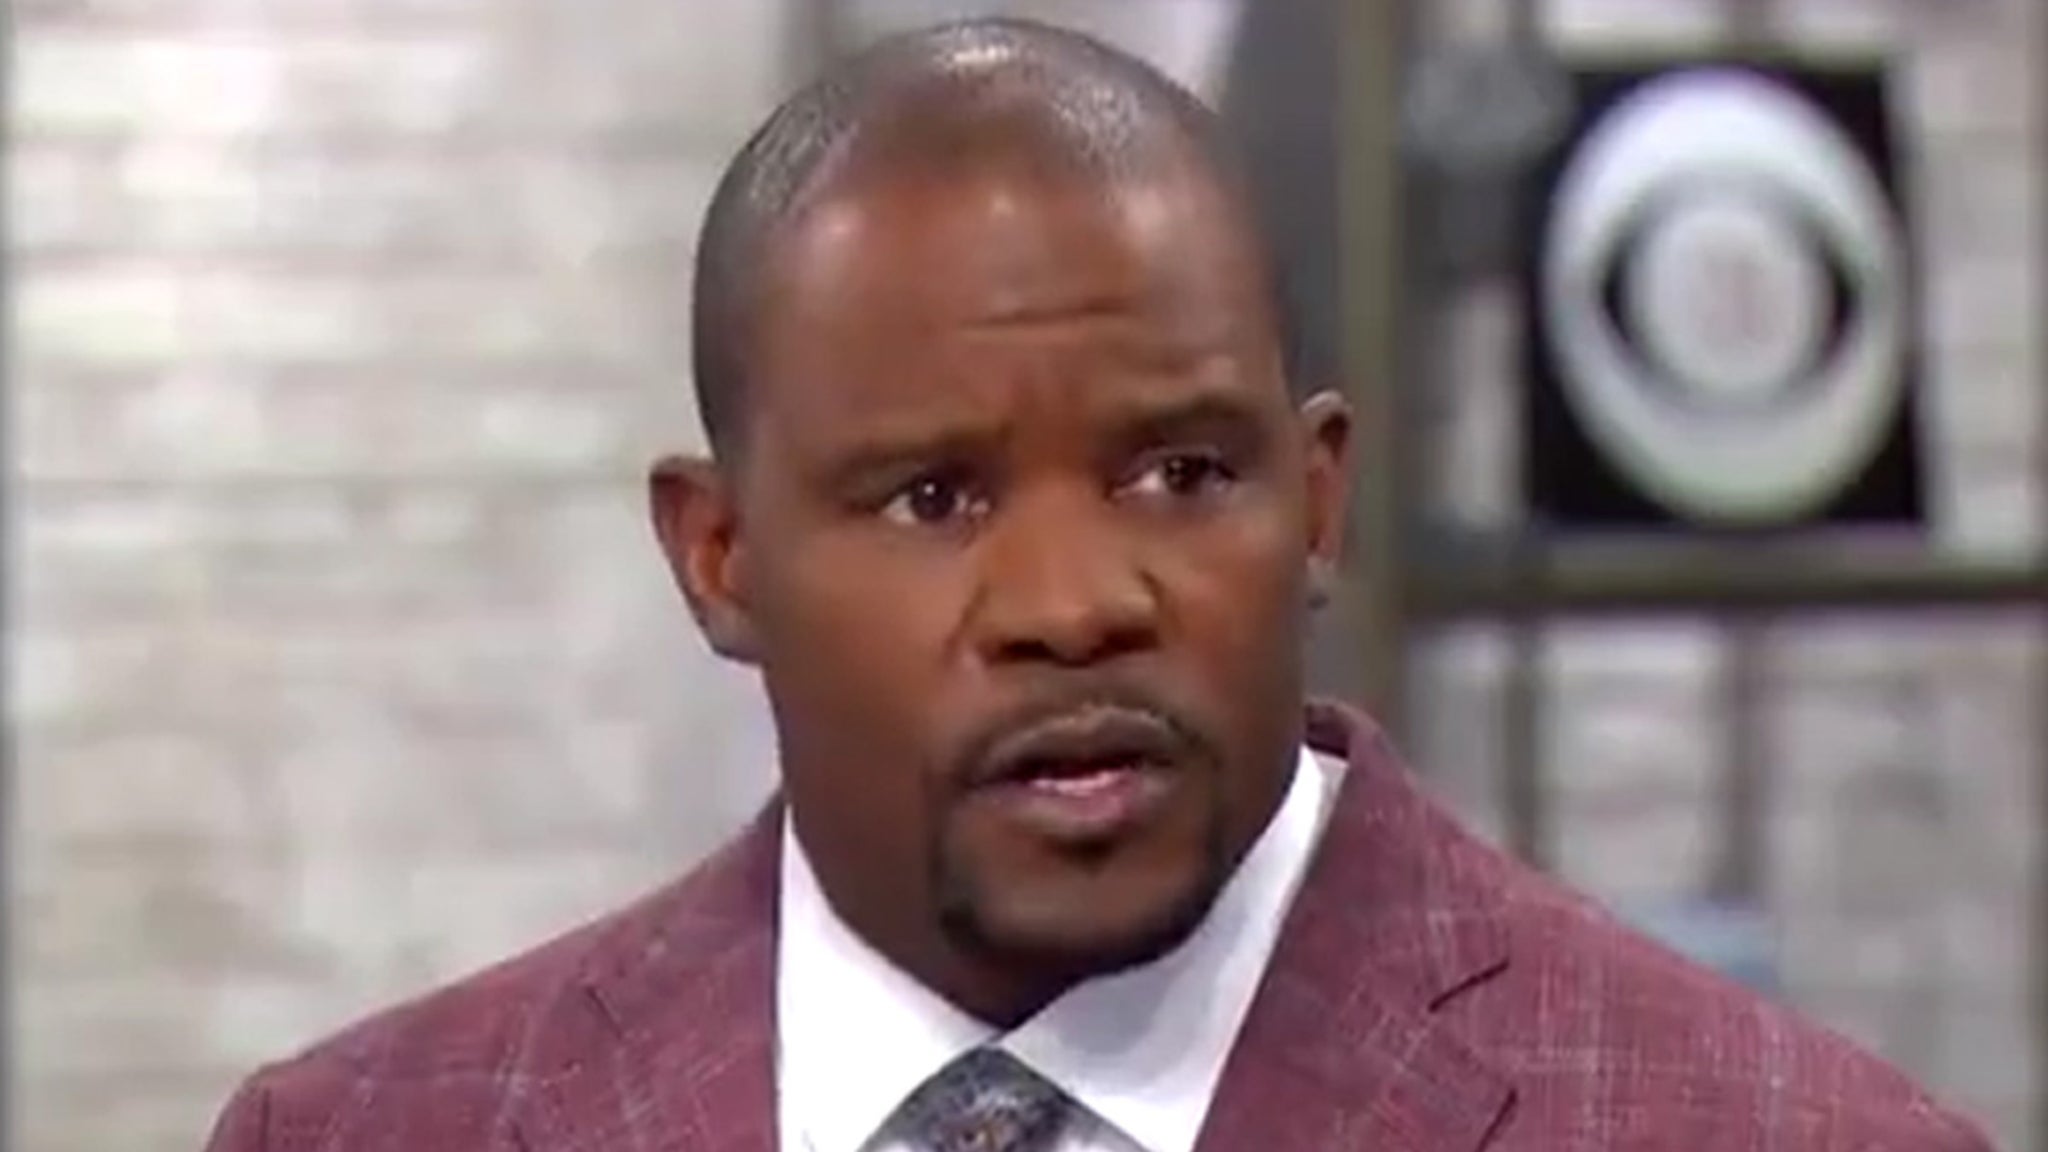 | Brian Flores Still Wants NFL Coaching Job, Knows Lawsuit Could Torpedo Career | The Paradise